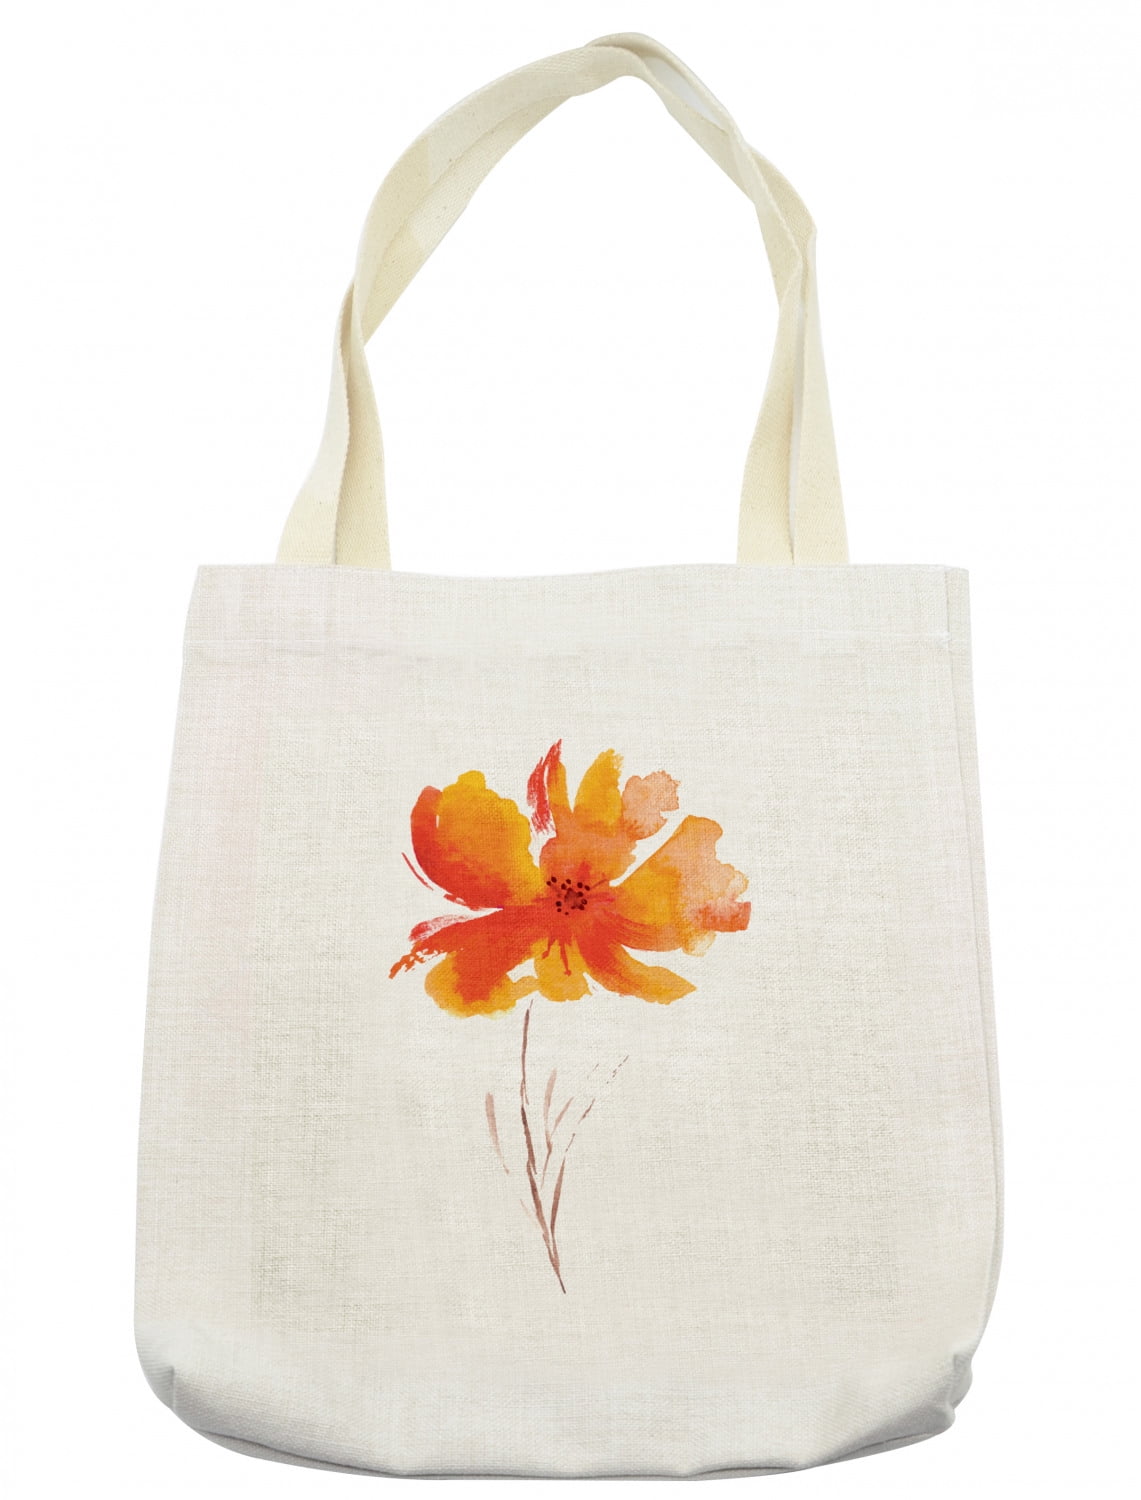 Ecofriendly Daily Use Bag School Bag Canvas Tote Bag Beach Bag Shopping Bag Hand Embroidered Flower Laptop Bag Gift For Her